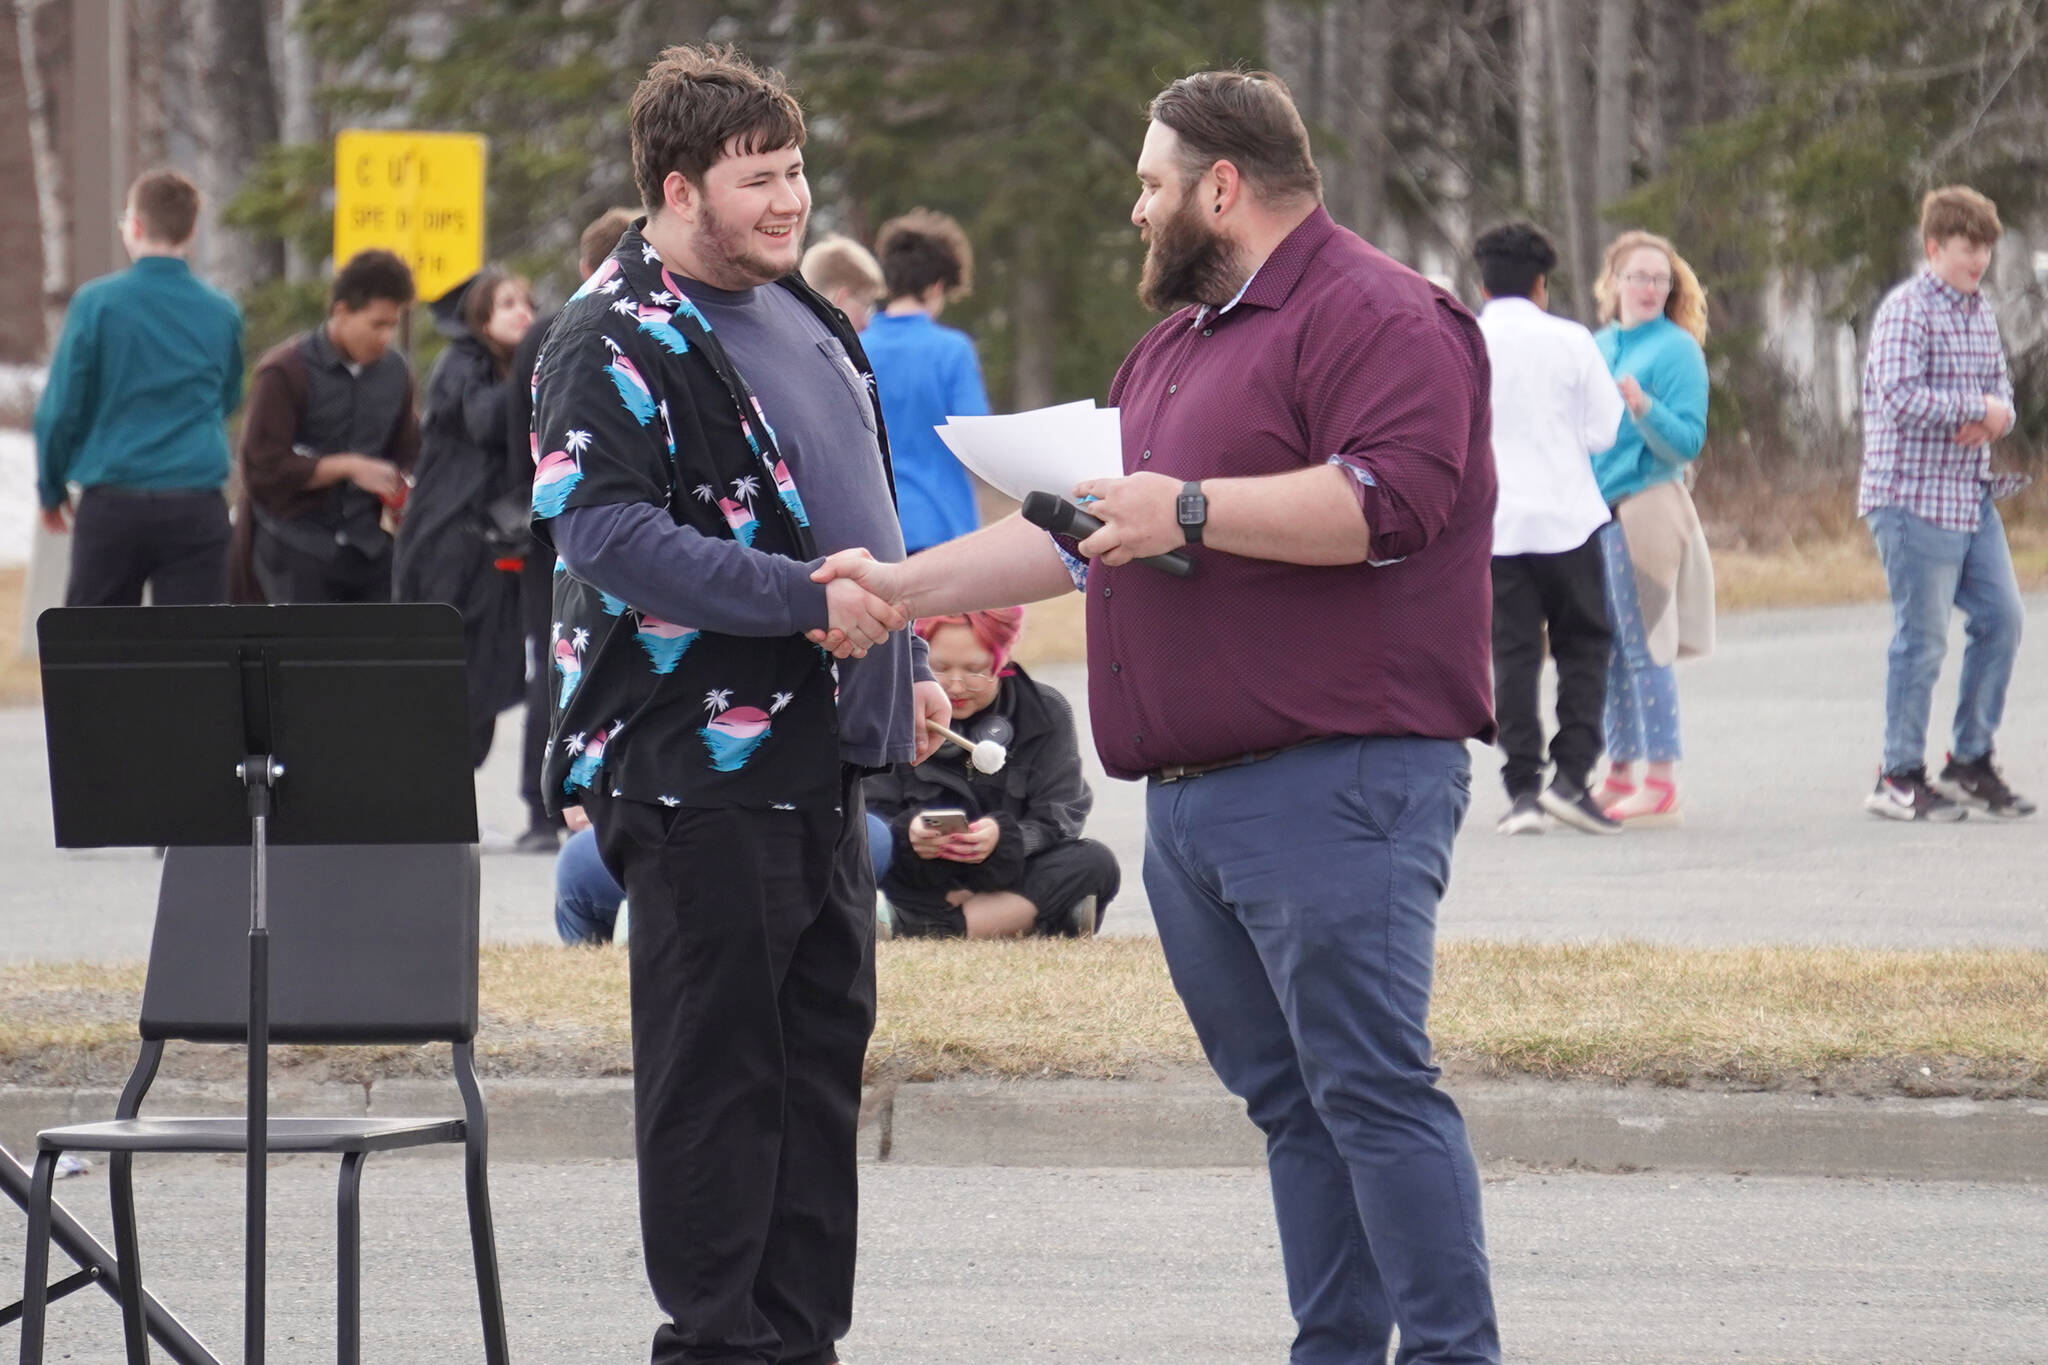 Jake Phillips receives an award and shakes hands with Band Director Christian Stephanos during Pops in the Parking Lot at Kenai Central High School in Kenai, Alaska, on Thursday, May 4, 2023. (Jake Dye/Peninsula Clarion)